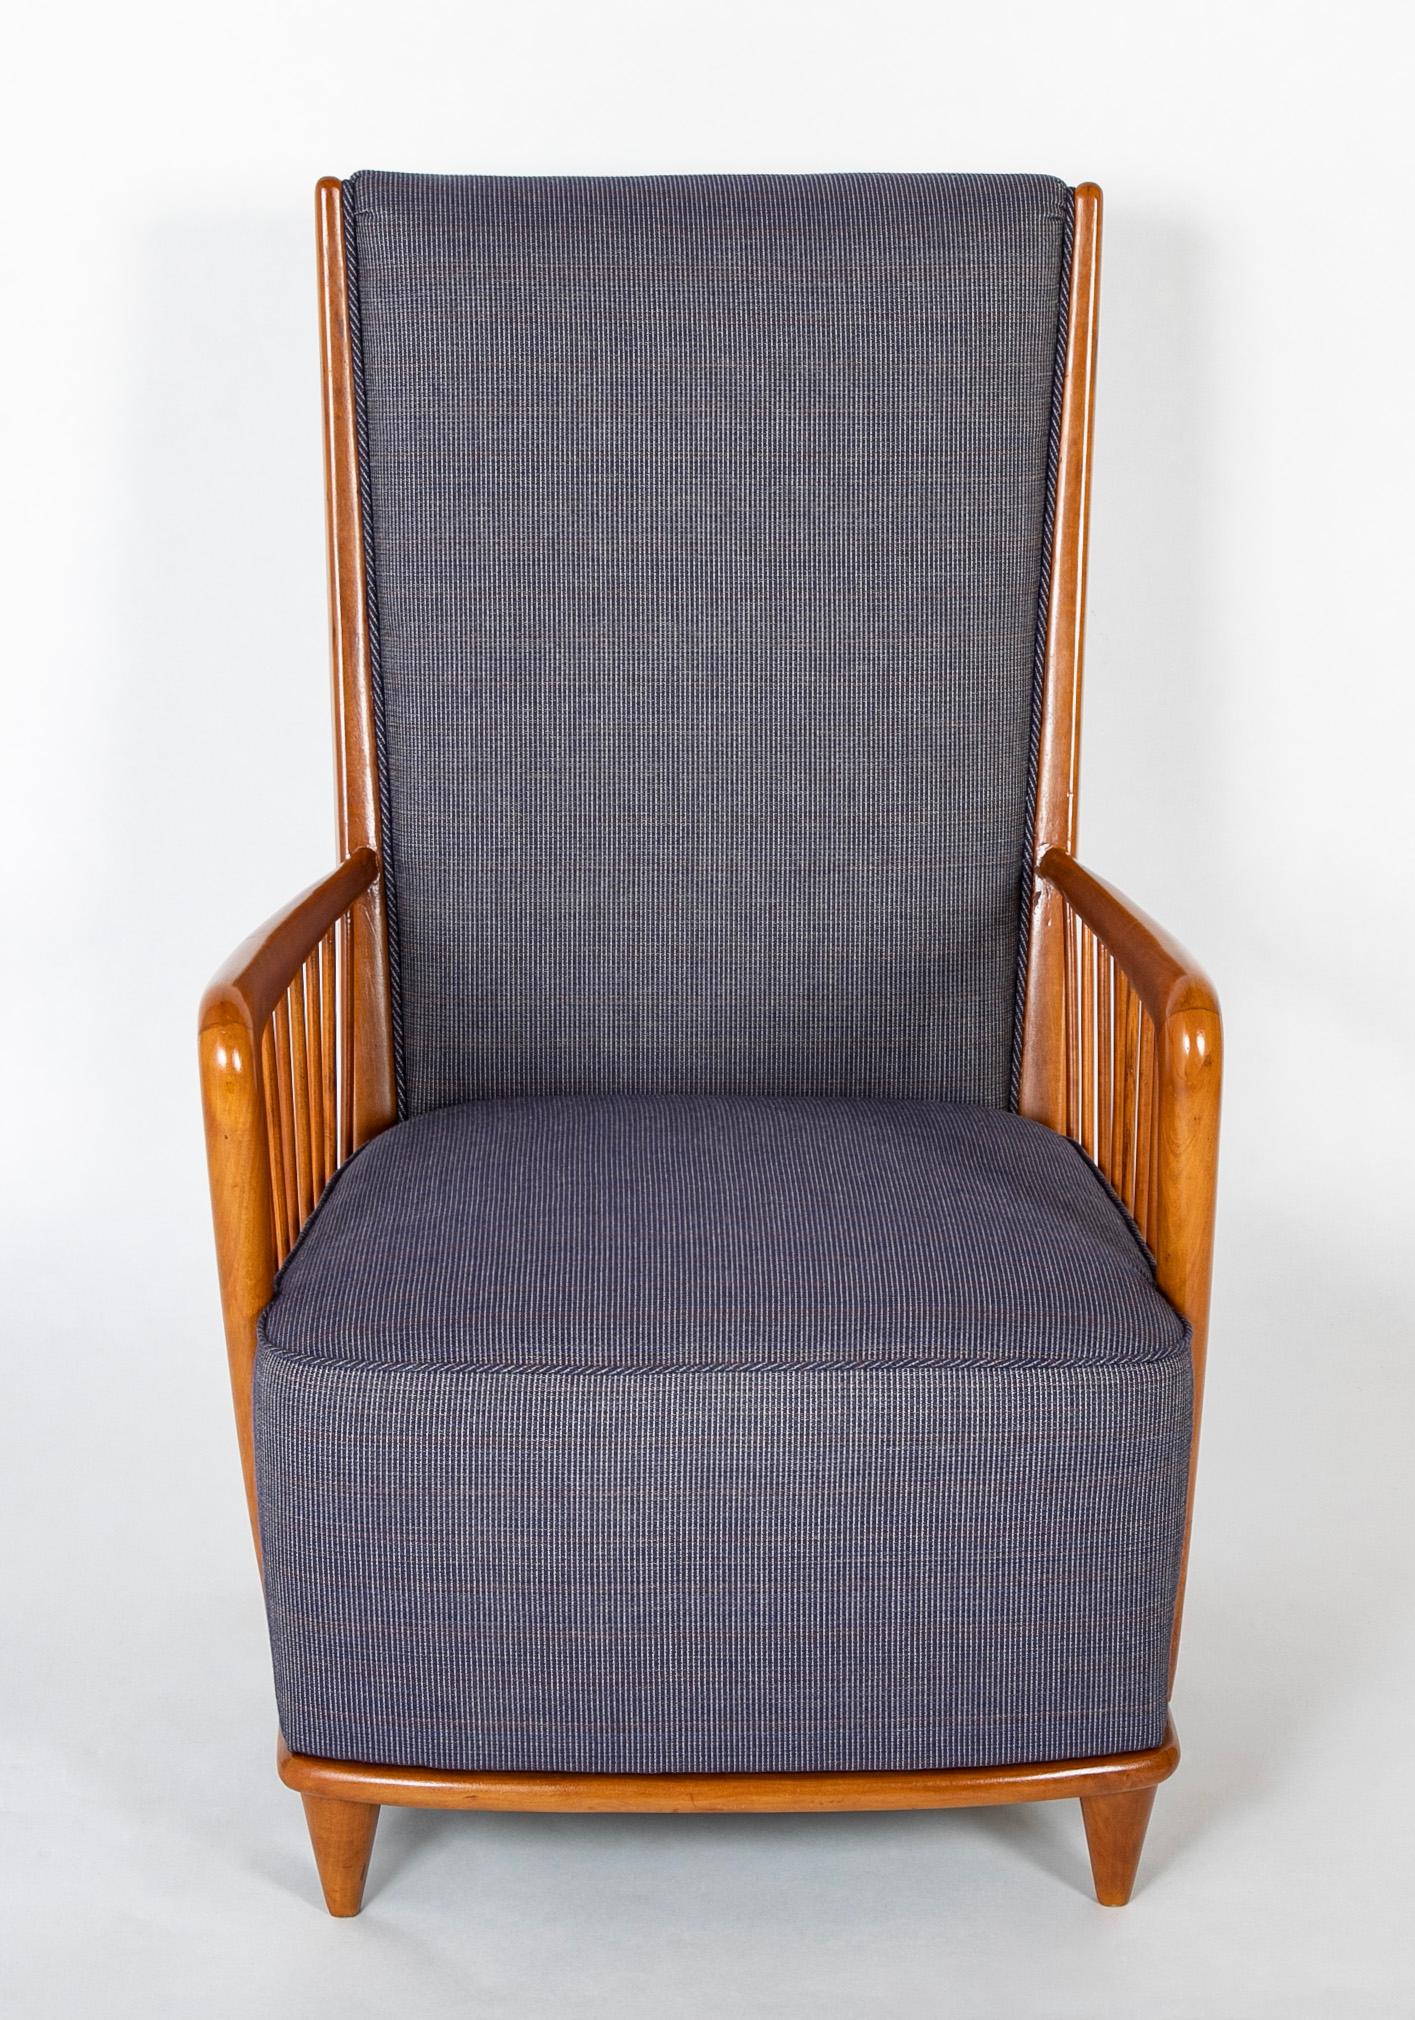 Italian upholstered armchair attributed to Paolo Buffa ( 1903 - 1970 ) having open vertical dowels in the arms.   